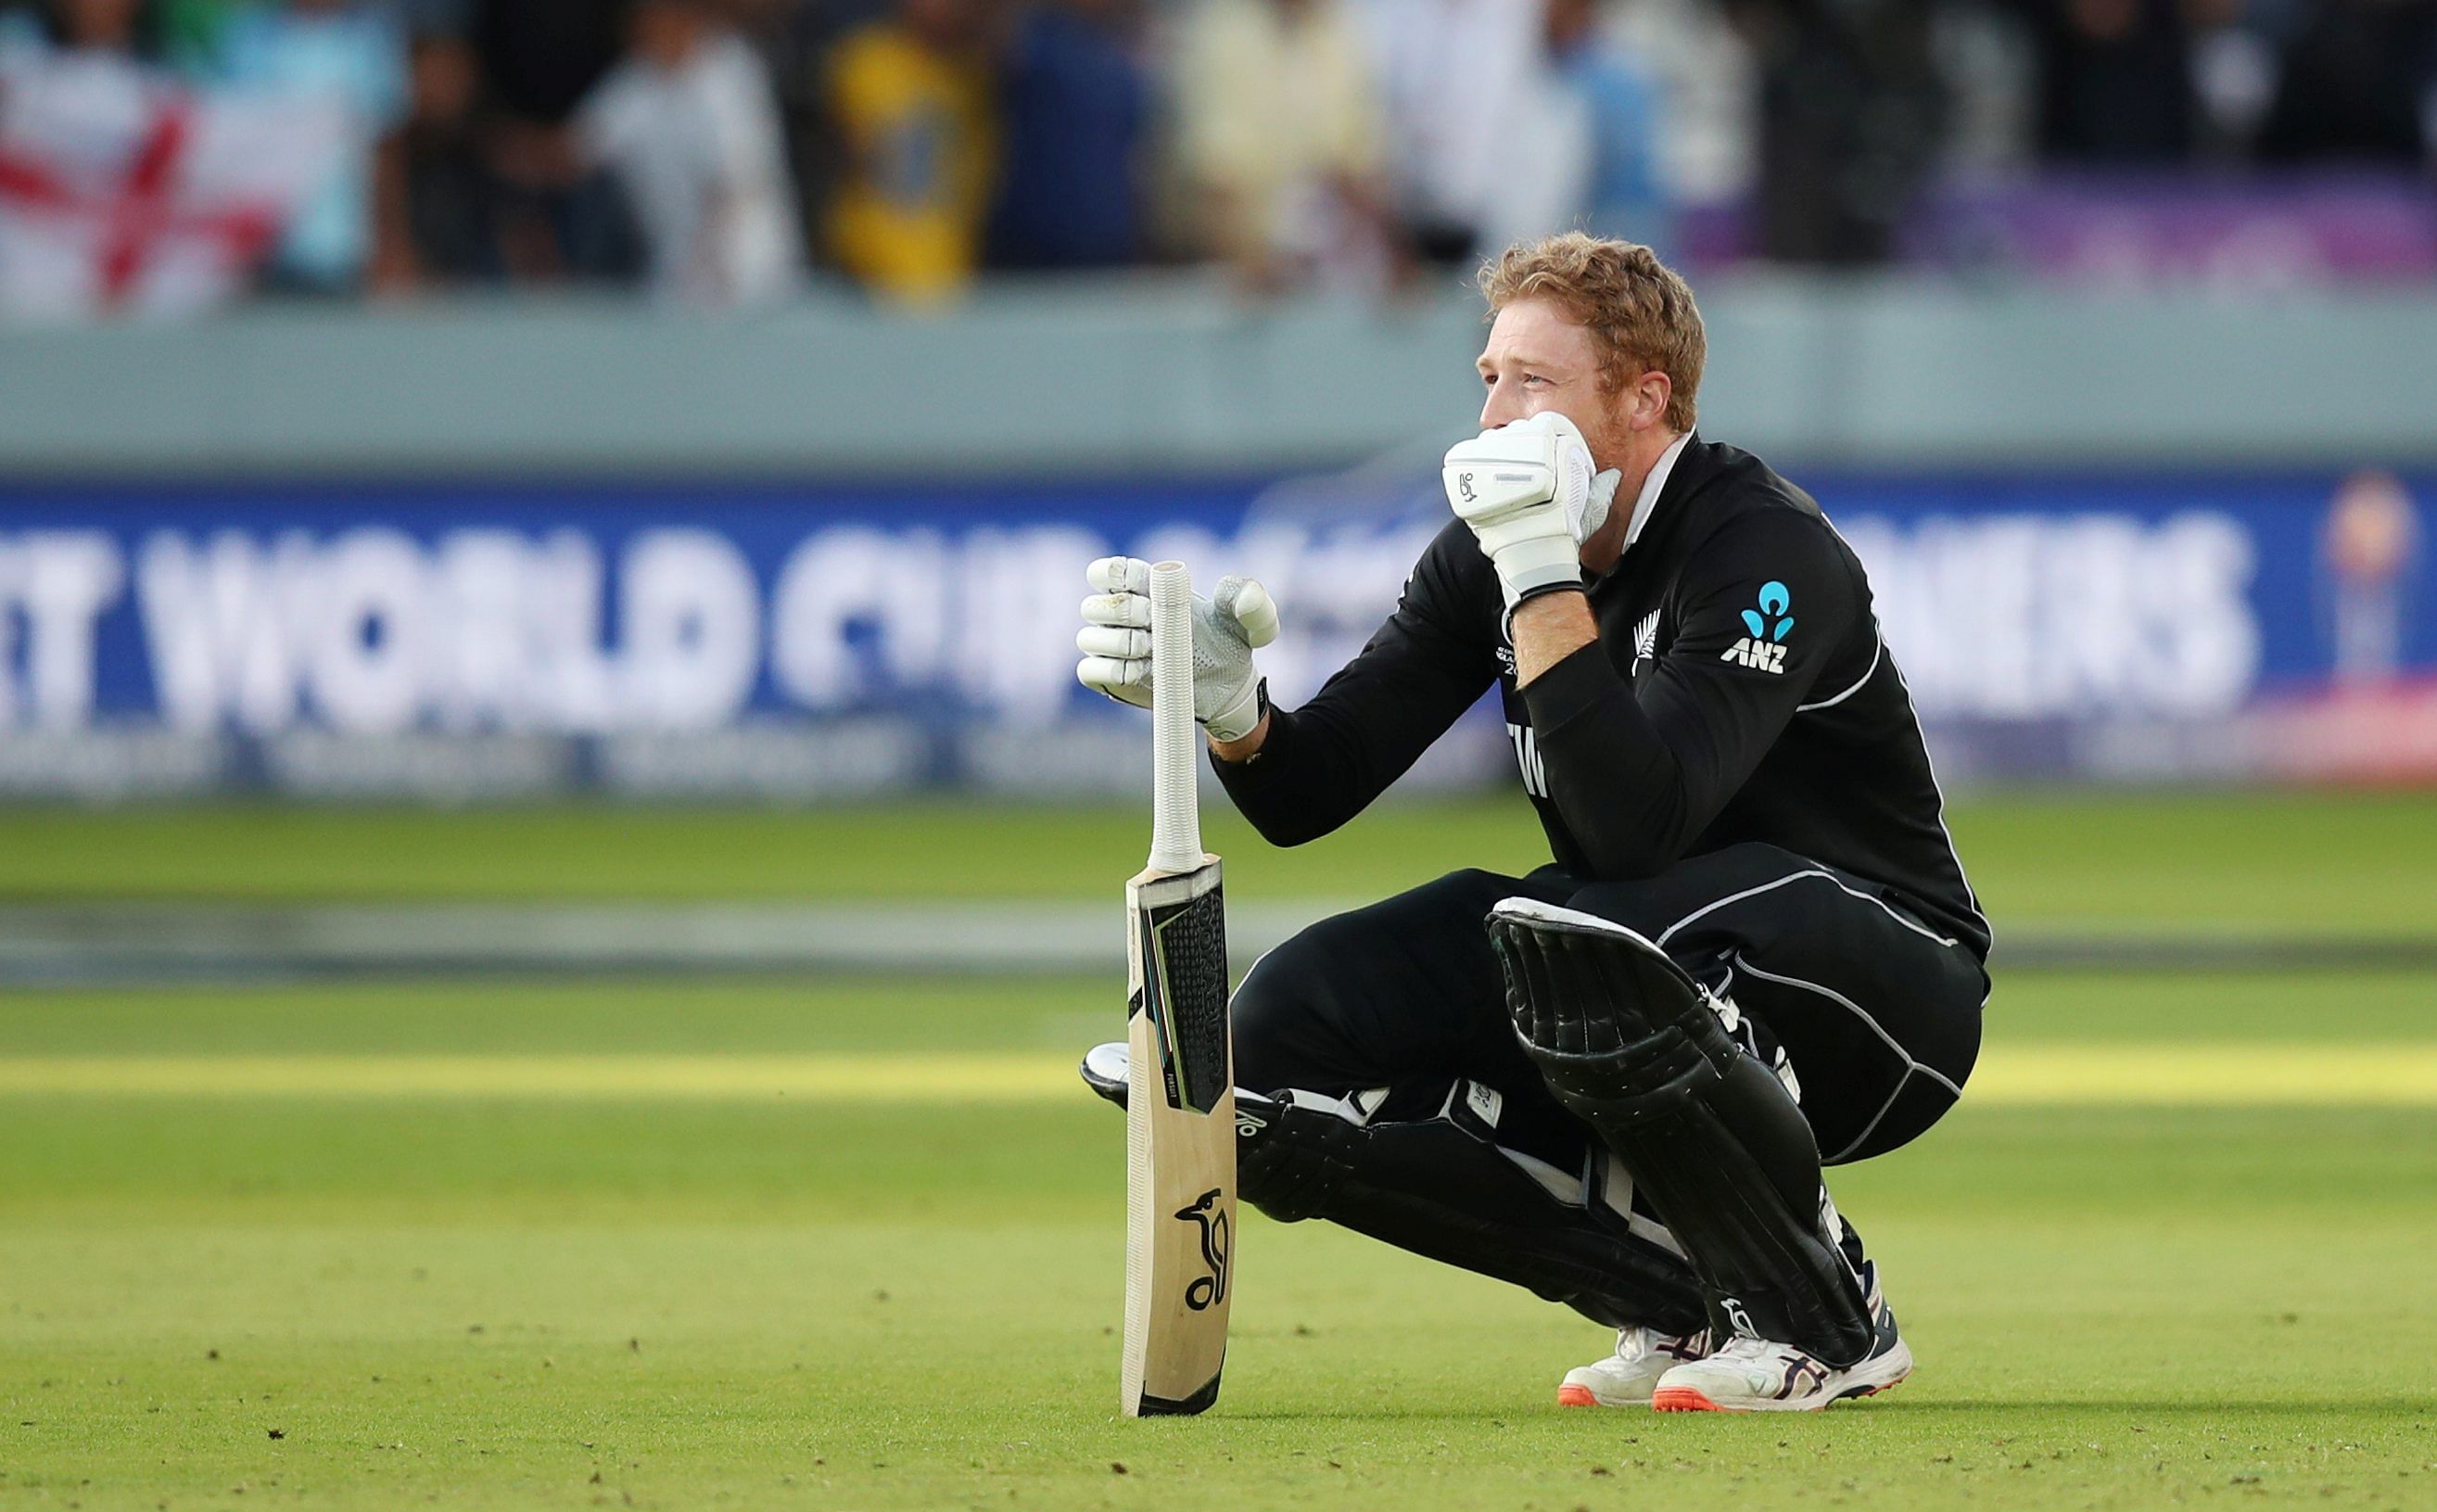 Guptill, New Zealand's most experienced short format international, took a blow to the big toe from a Haris Rauf delivery just before he was dismissed. Credit: Reuters File Photo